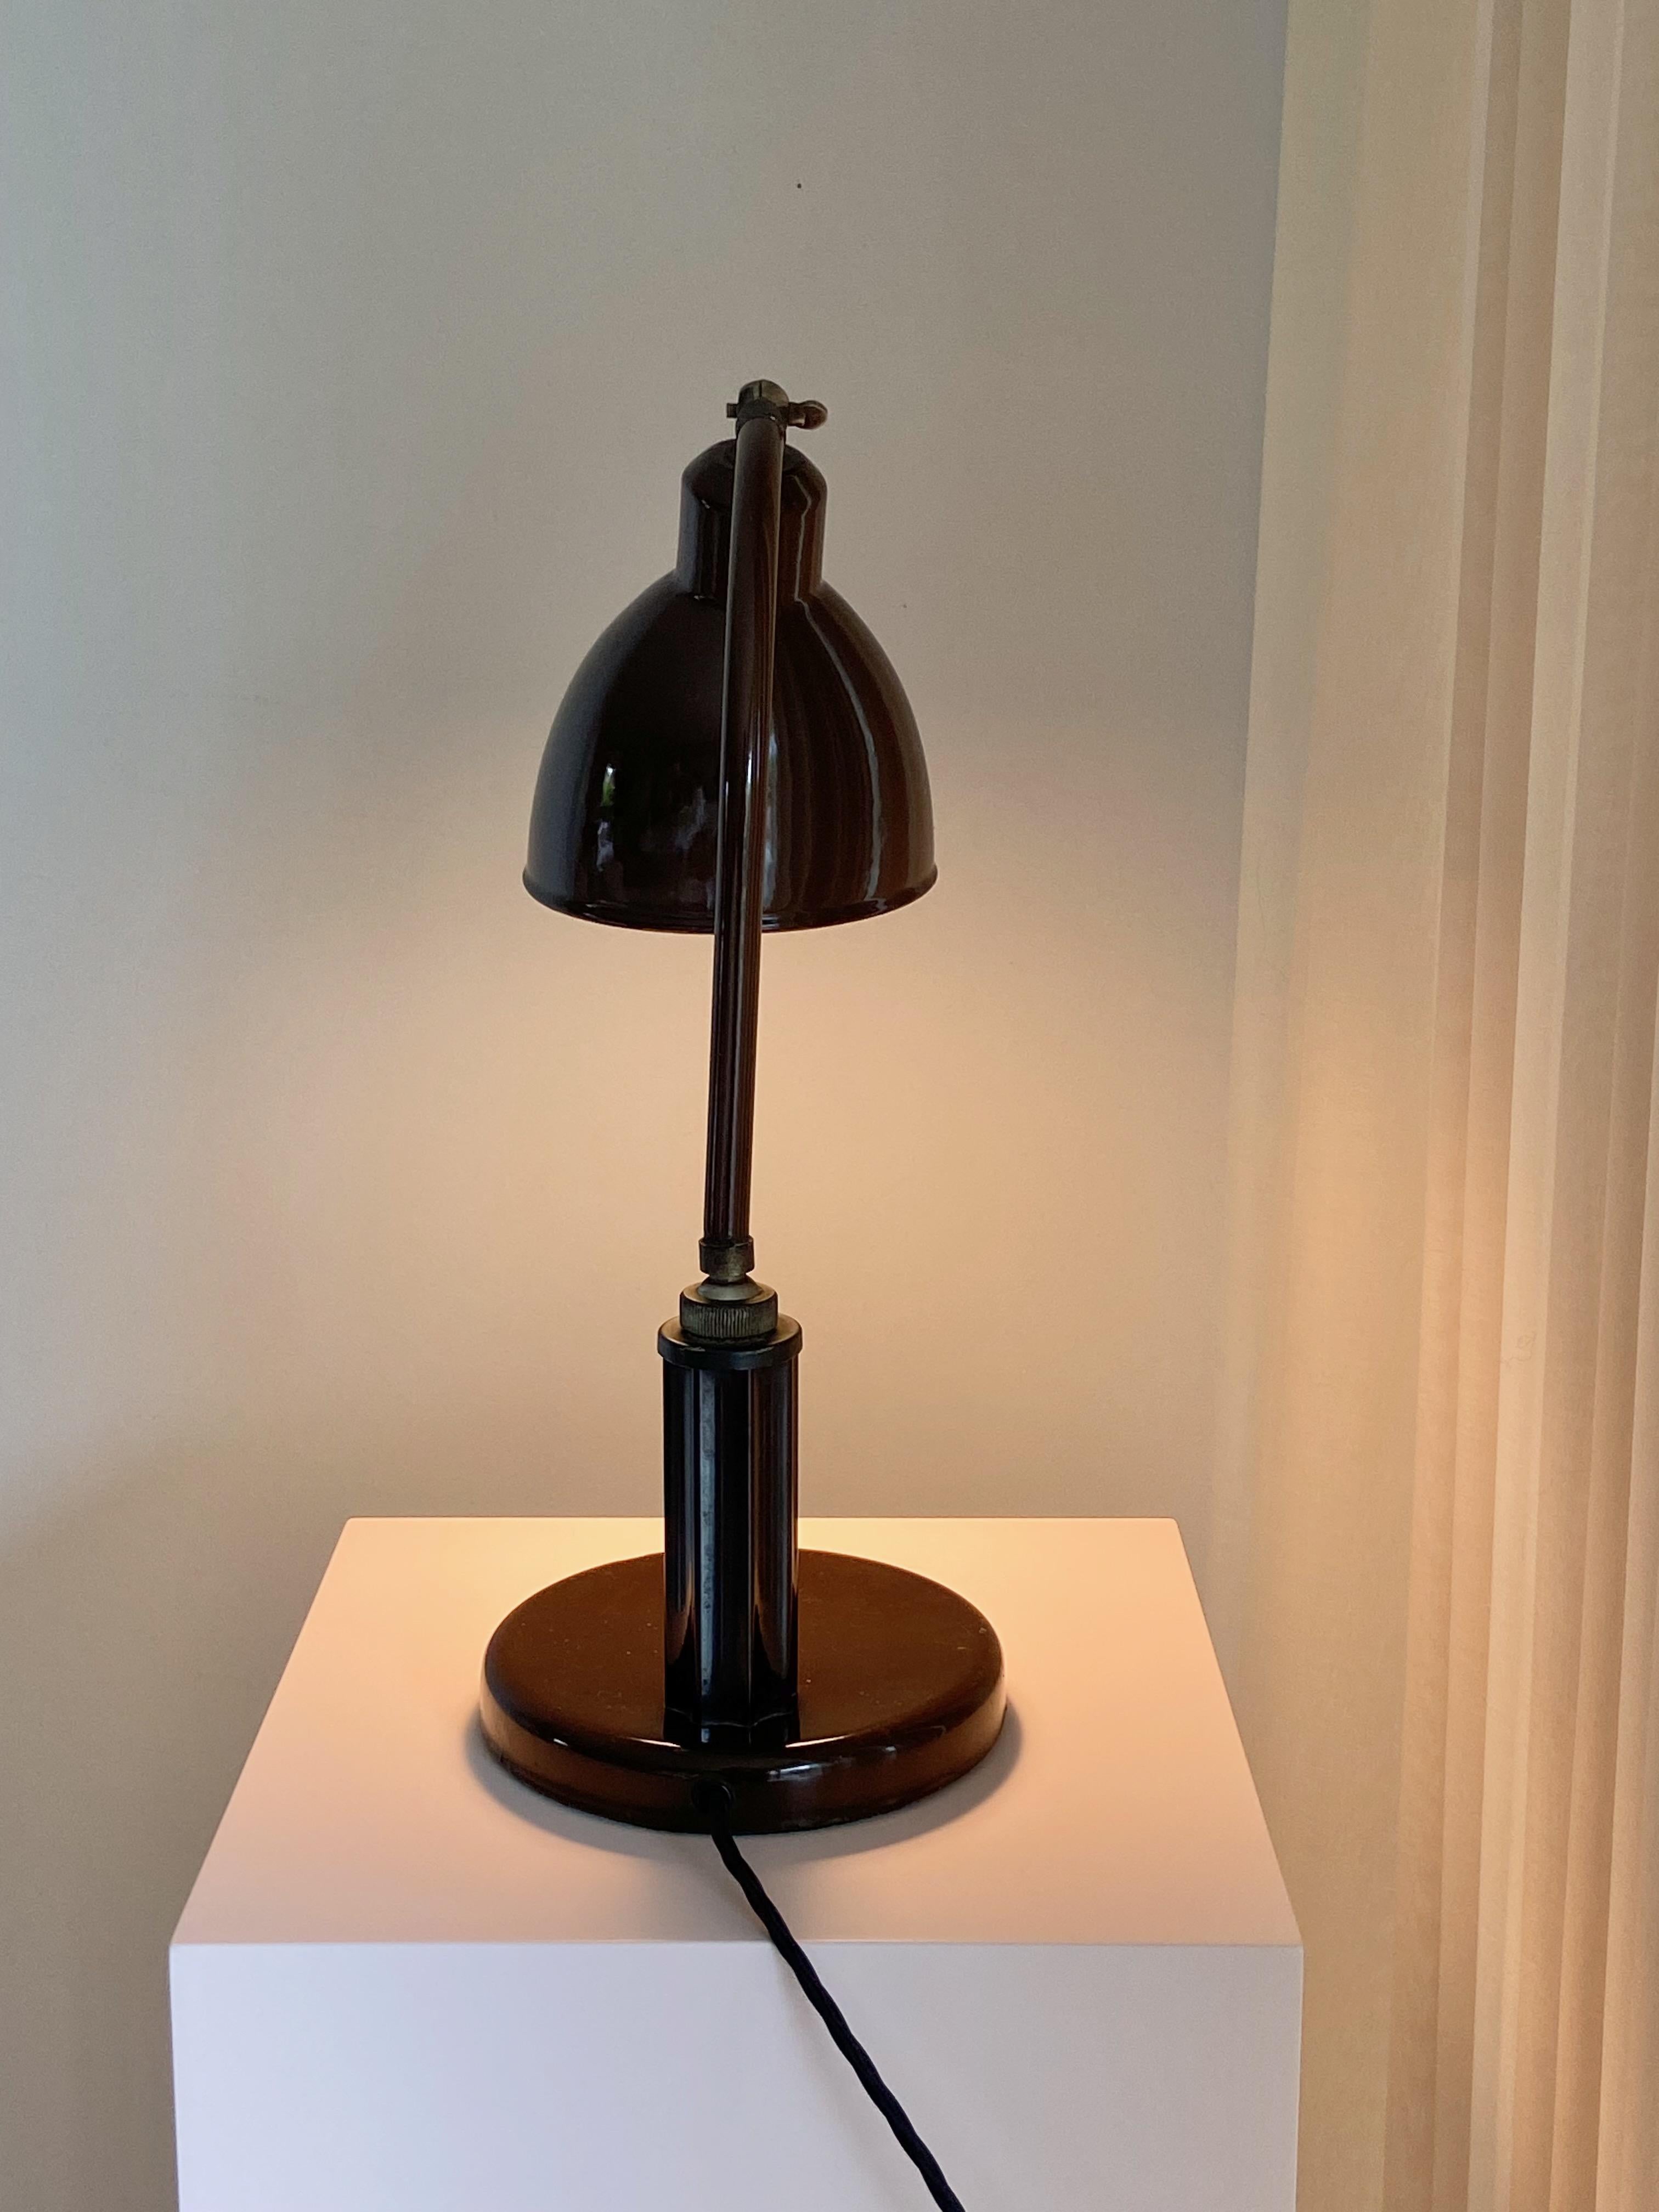 Molitor Grapholux Lamp Brown Enamel and Bakelite Stick by Christian Dell 1930s For Sale 7